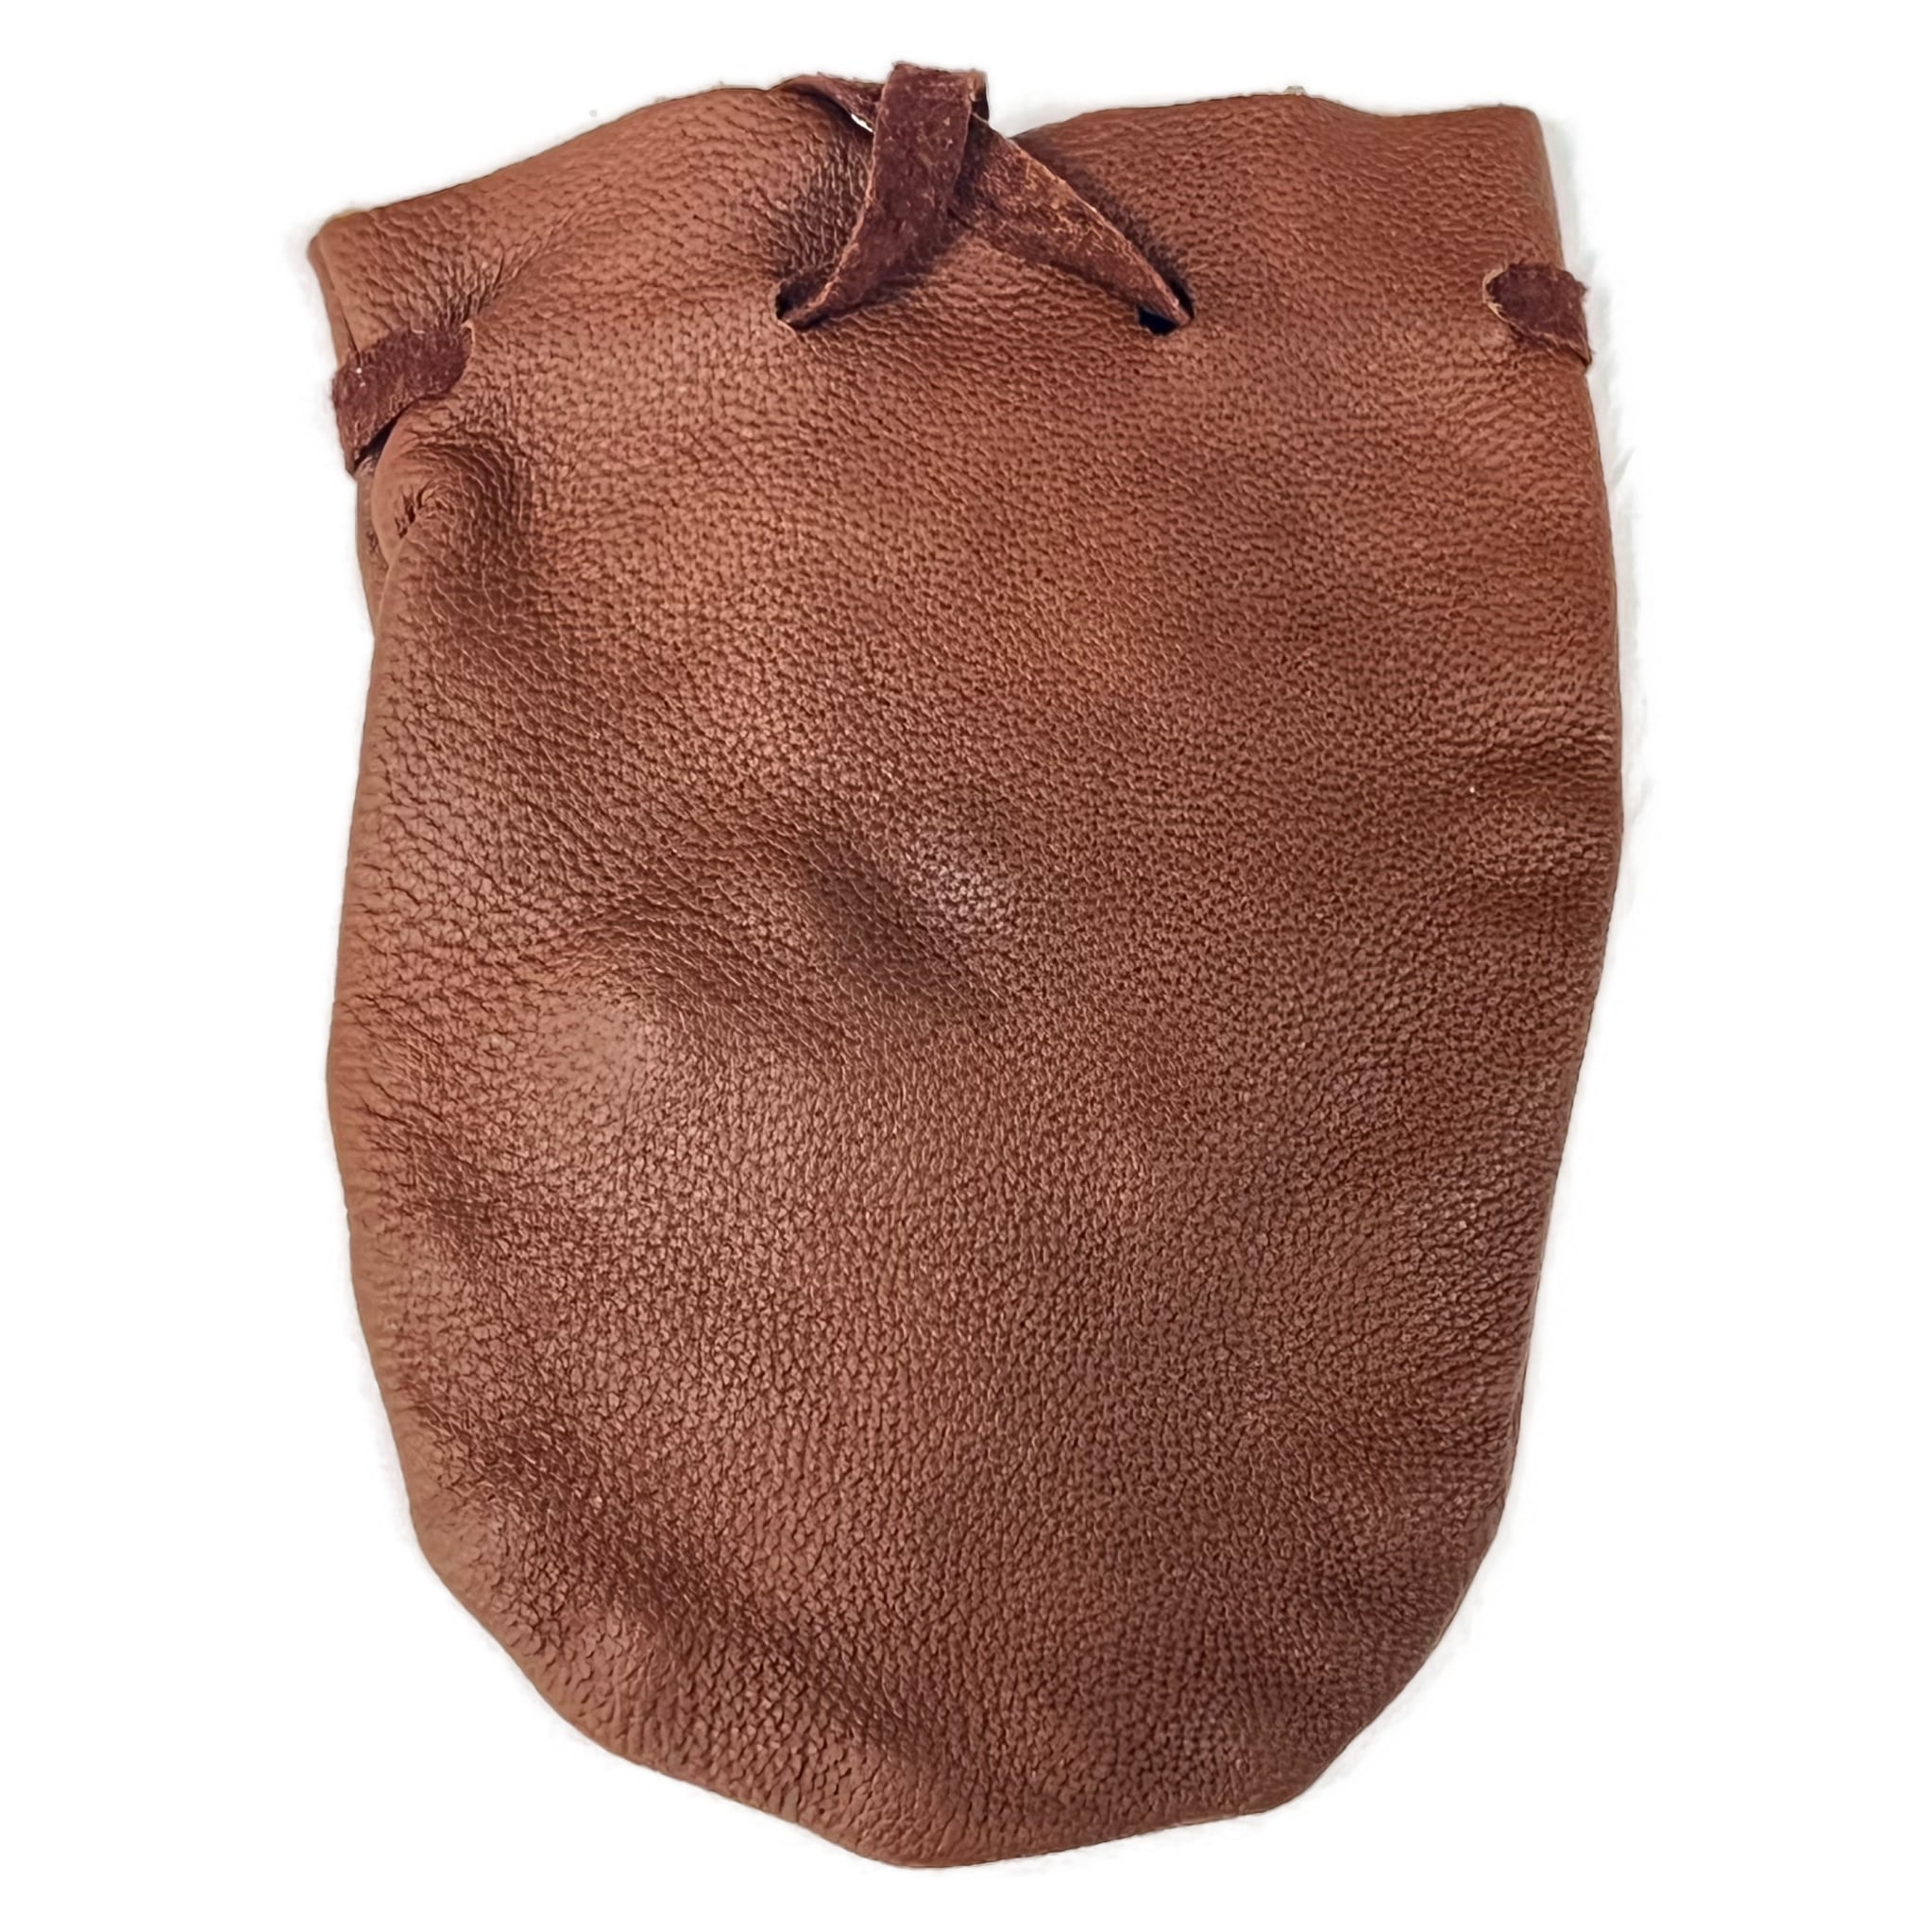 Large dark brown leather pouch 